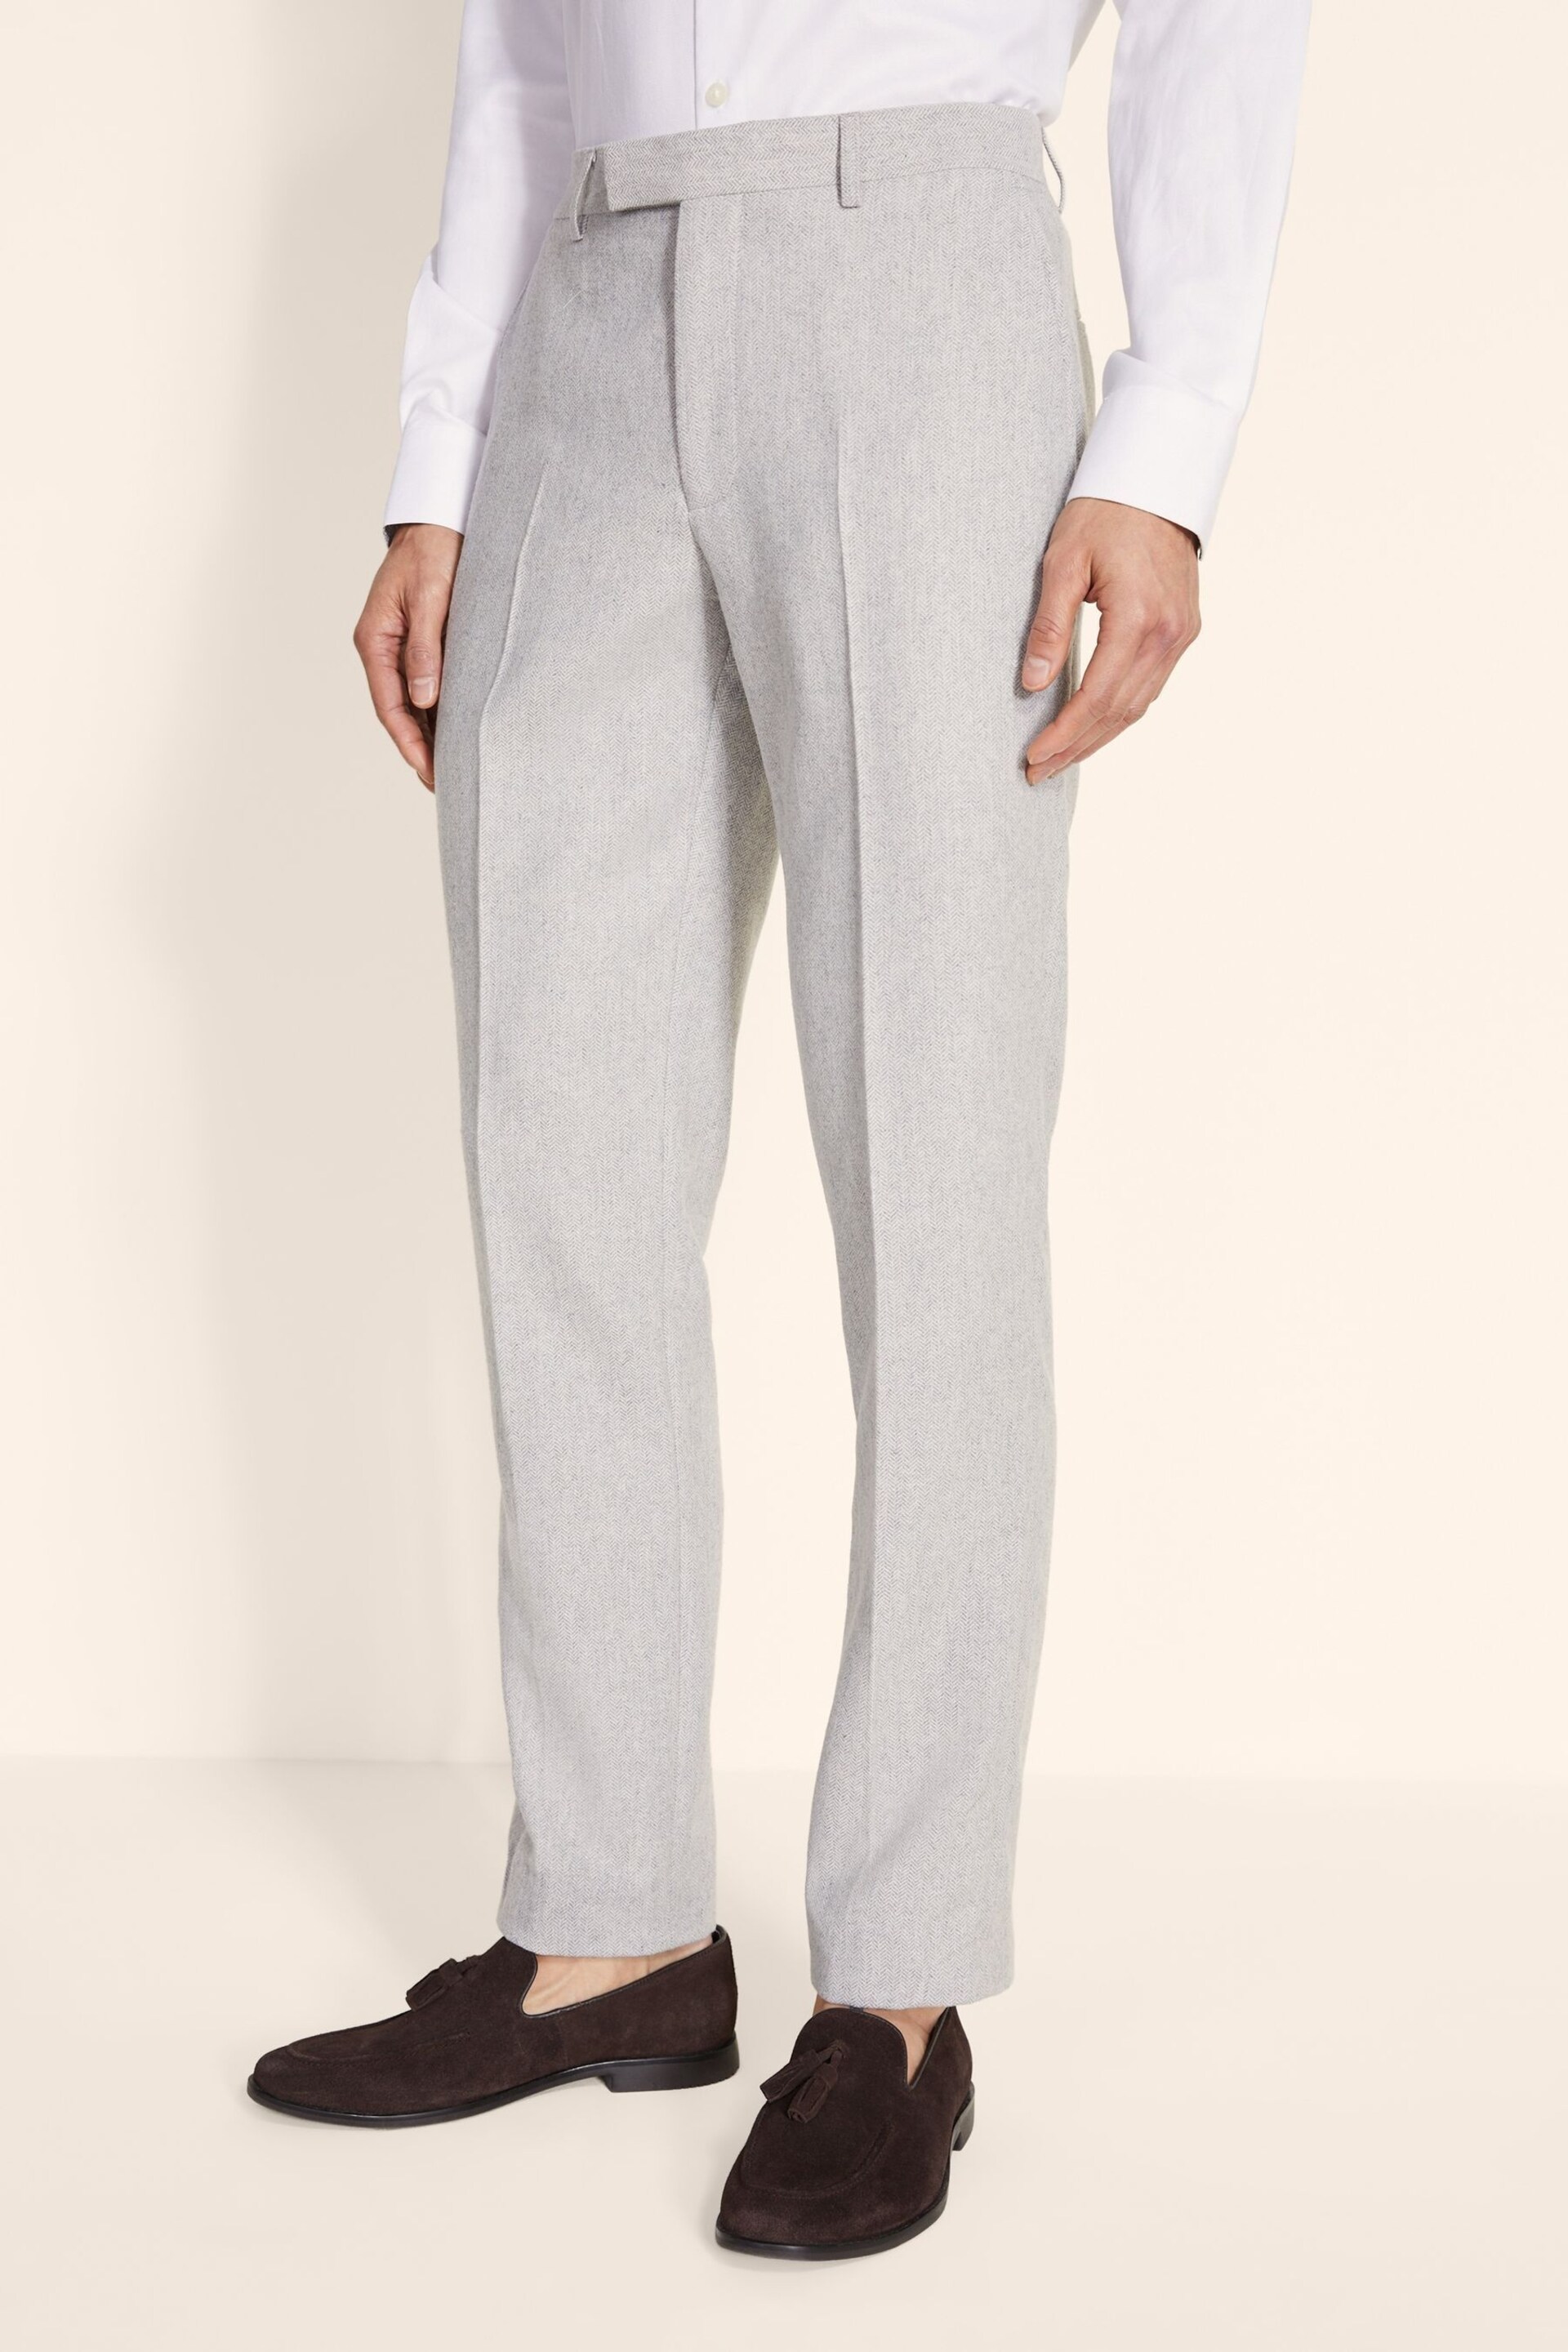 MOSS Grey Tailored Fit Light Herringbone Trousers - Image 1 of 3